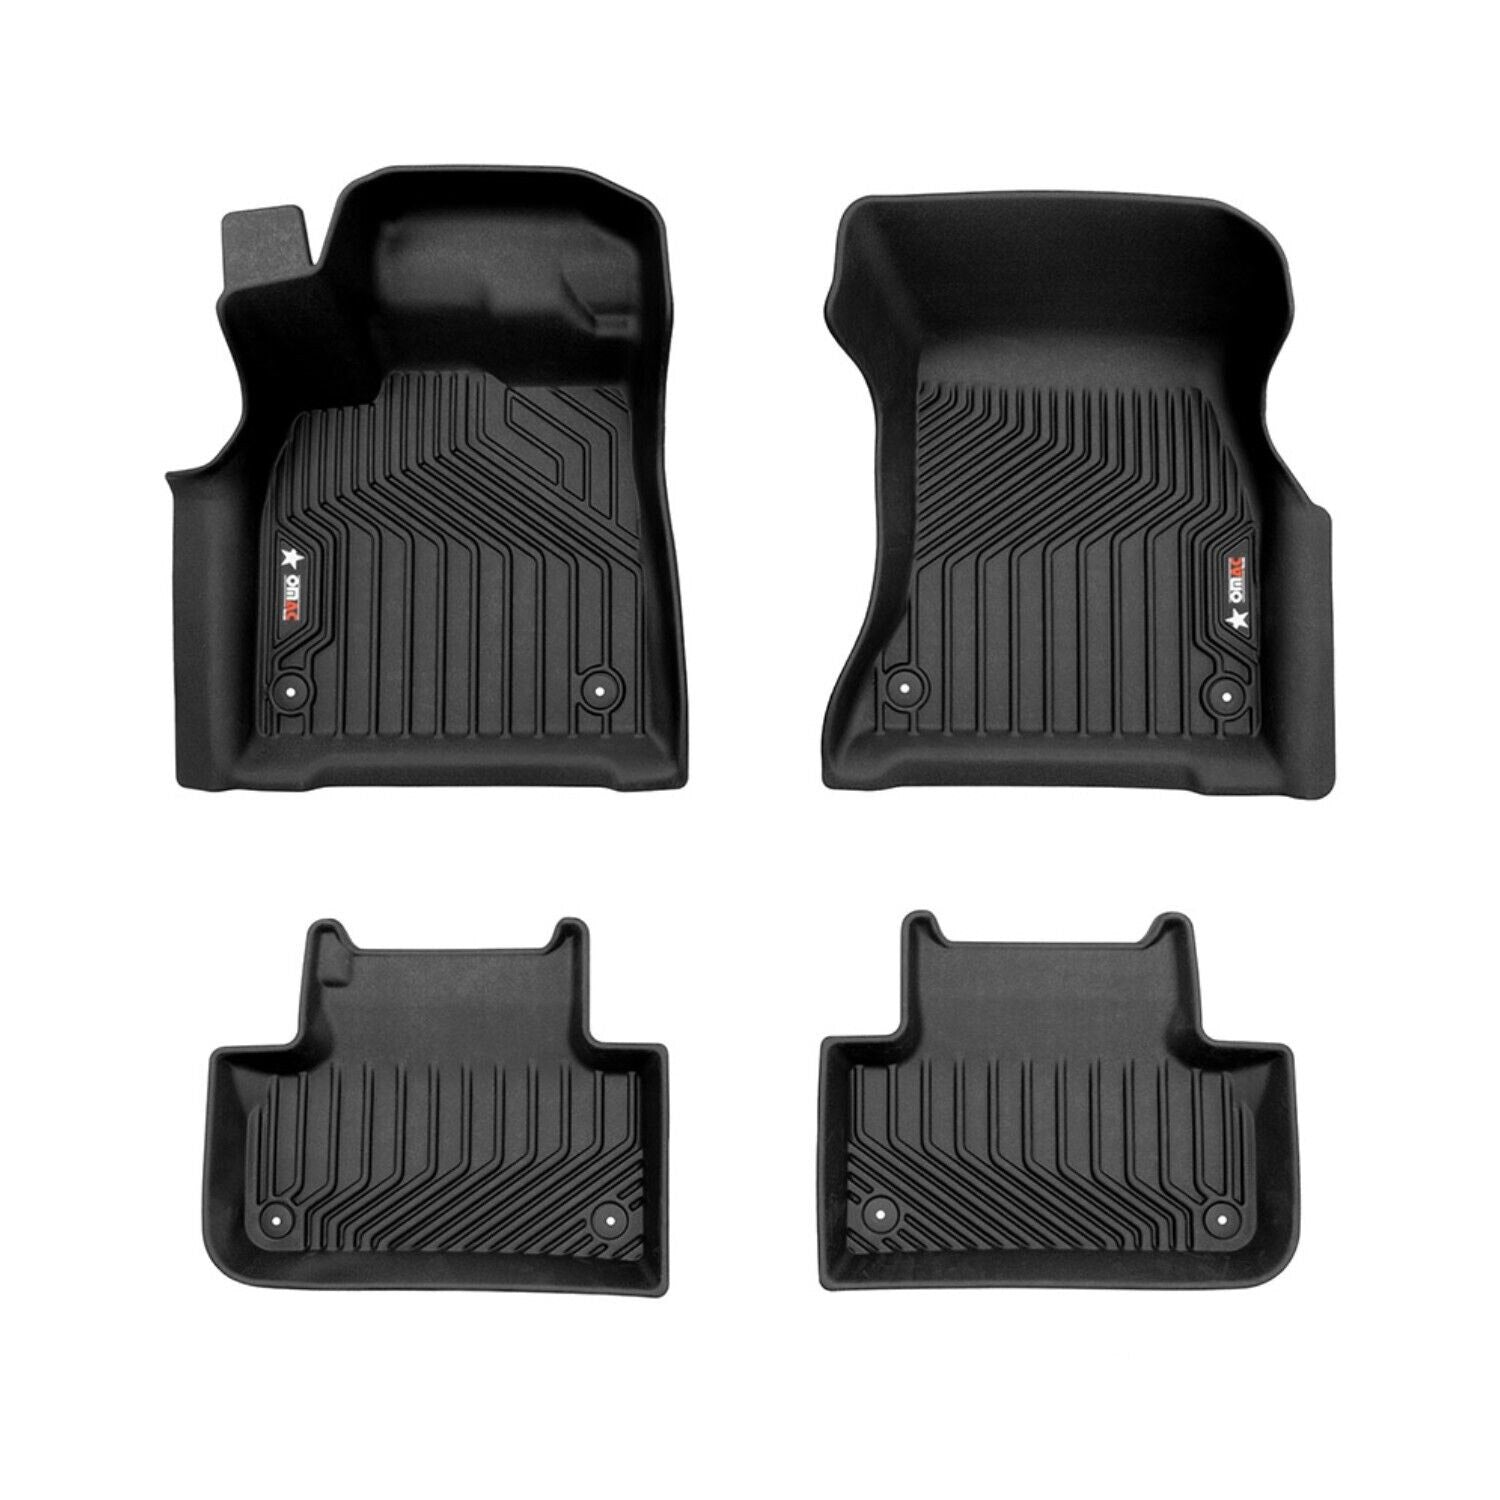 OMAC Floor Mats Audi Q5 PHEV 2018-2023 Front and Back All Weather High Edge Black